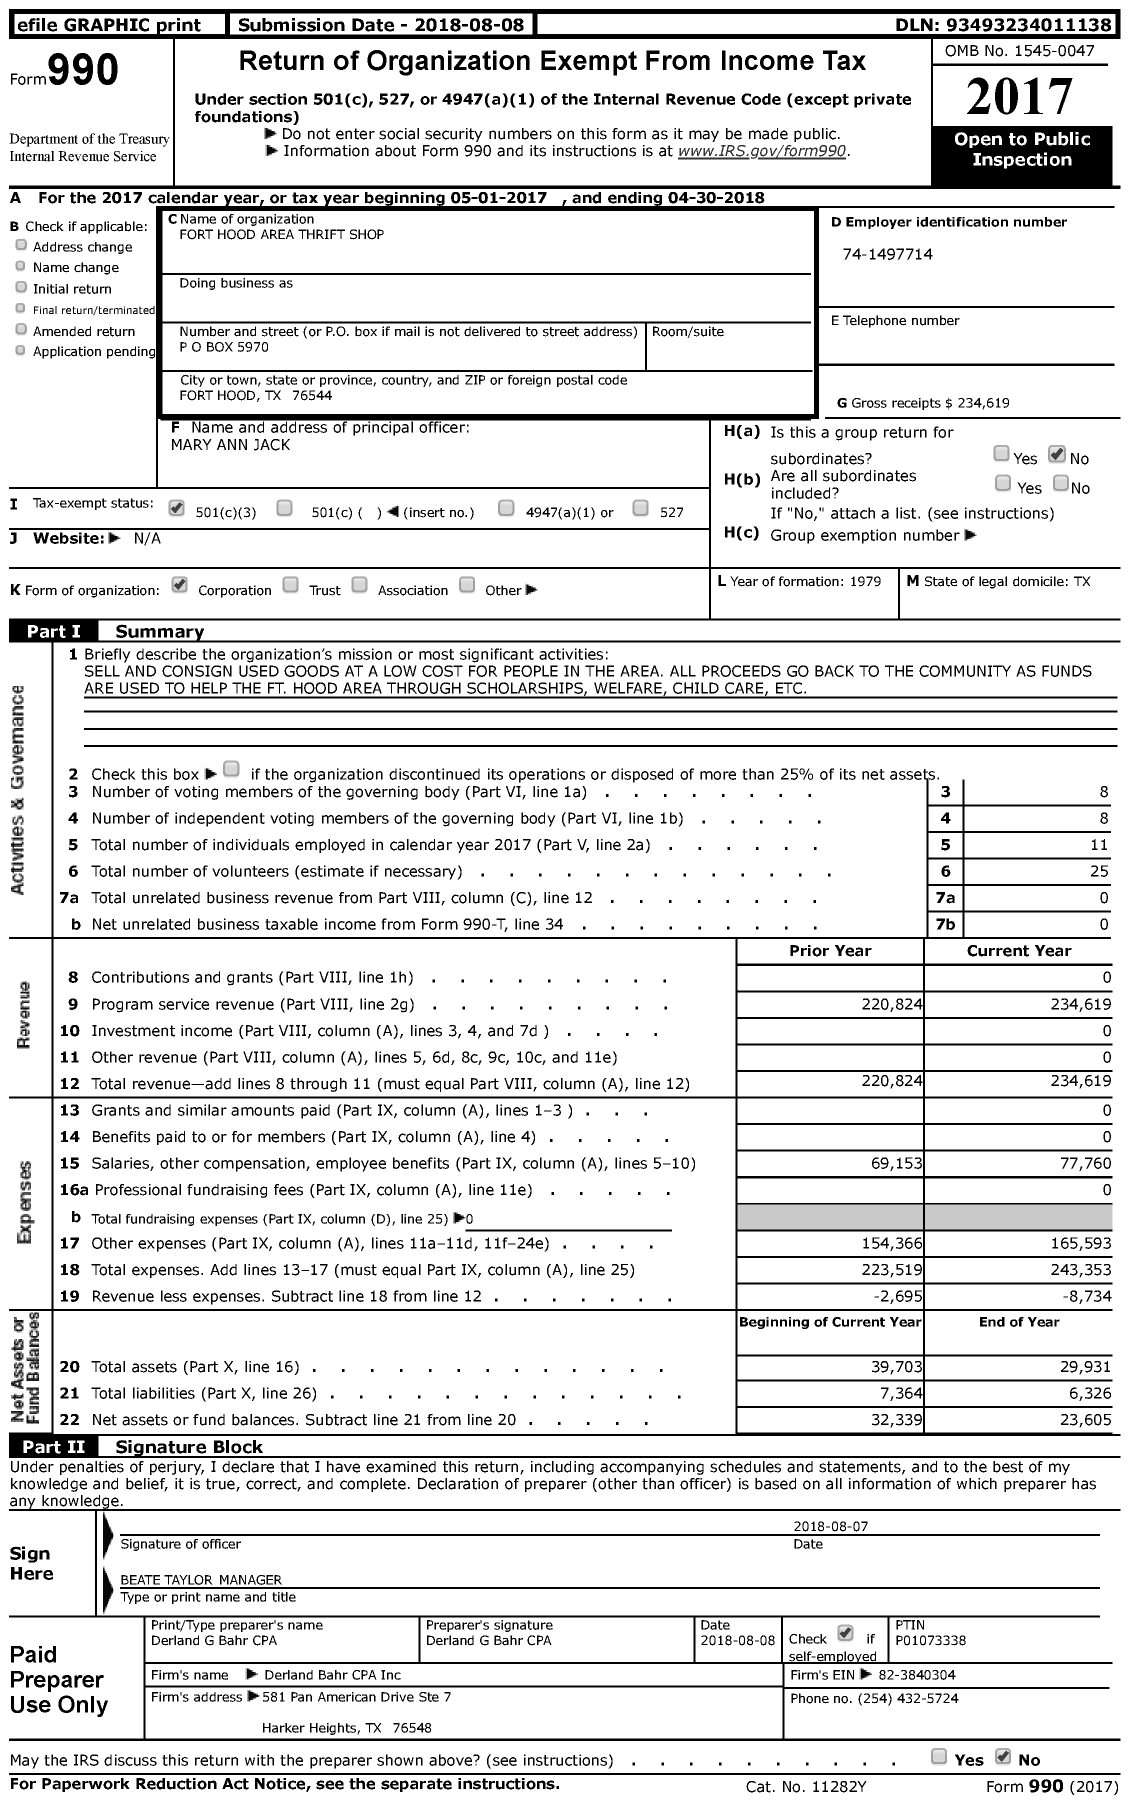 Image of first page of 2017 Form 990 for Fort Hood Area Thrift Shop